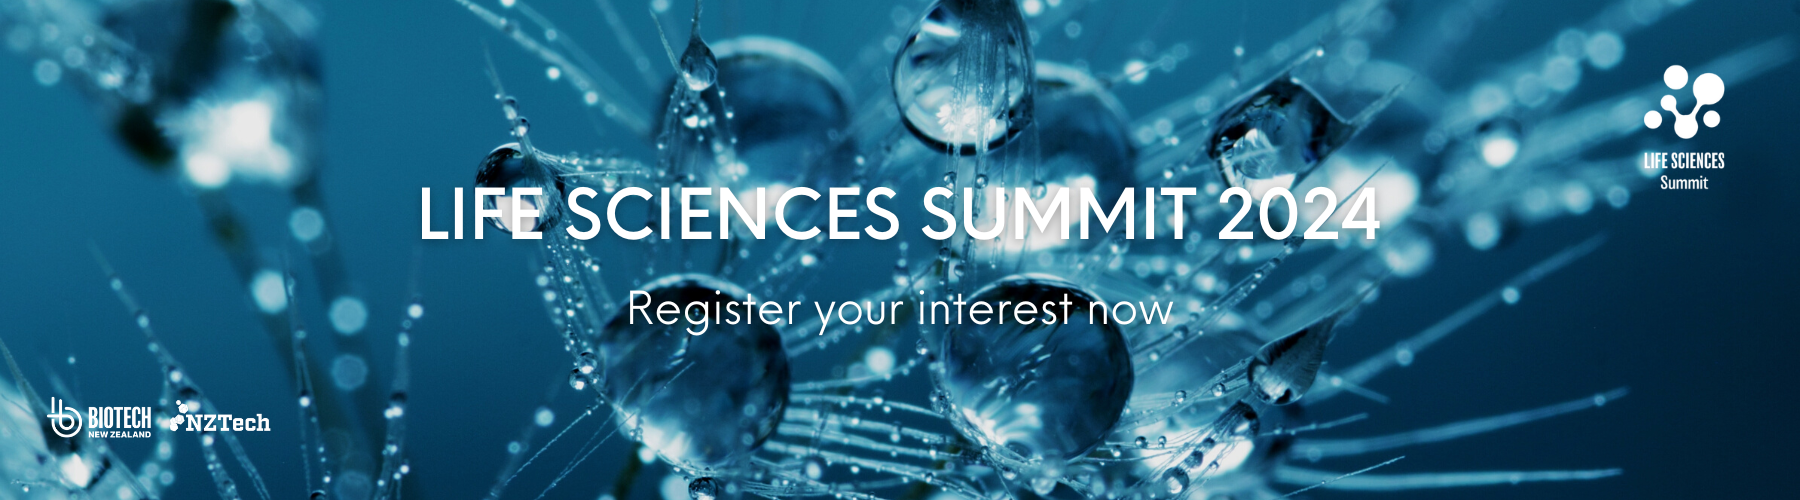 Life Sciences Summit 2024 Save the date! BIOTechNZ